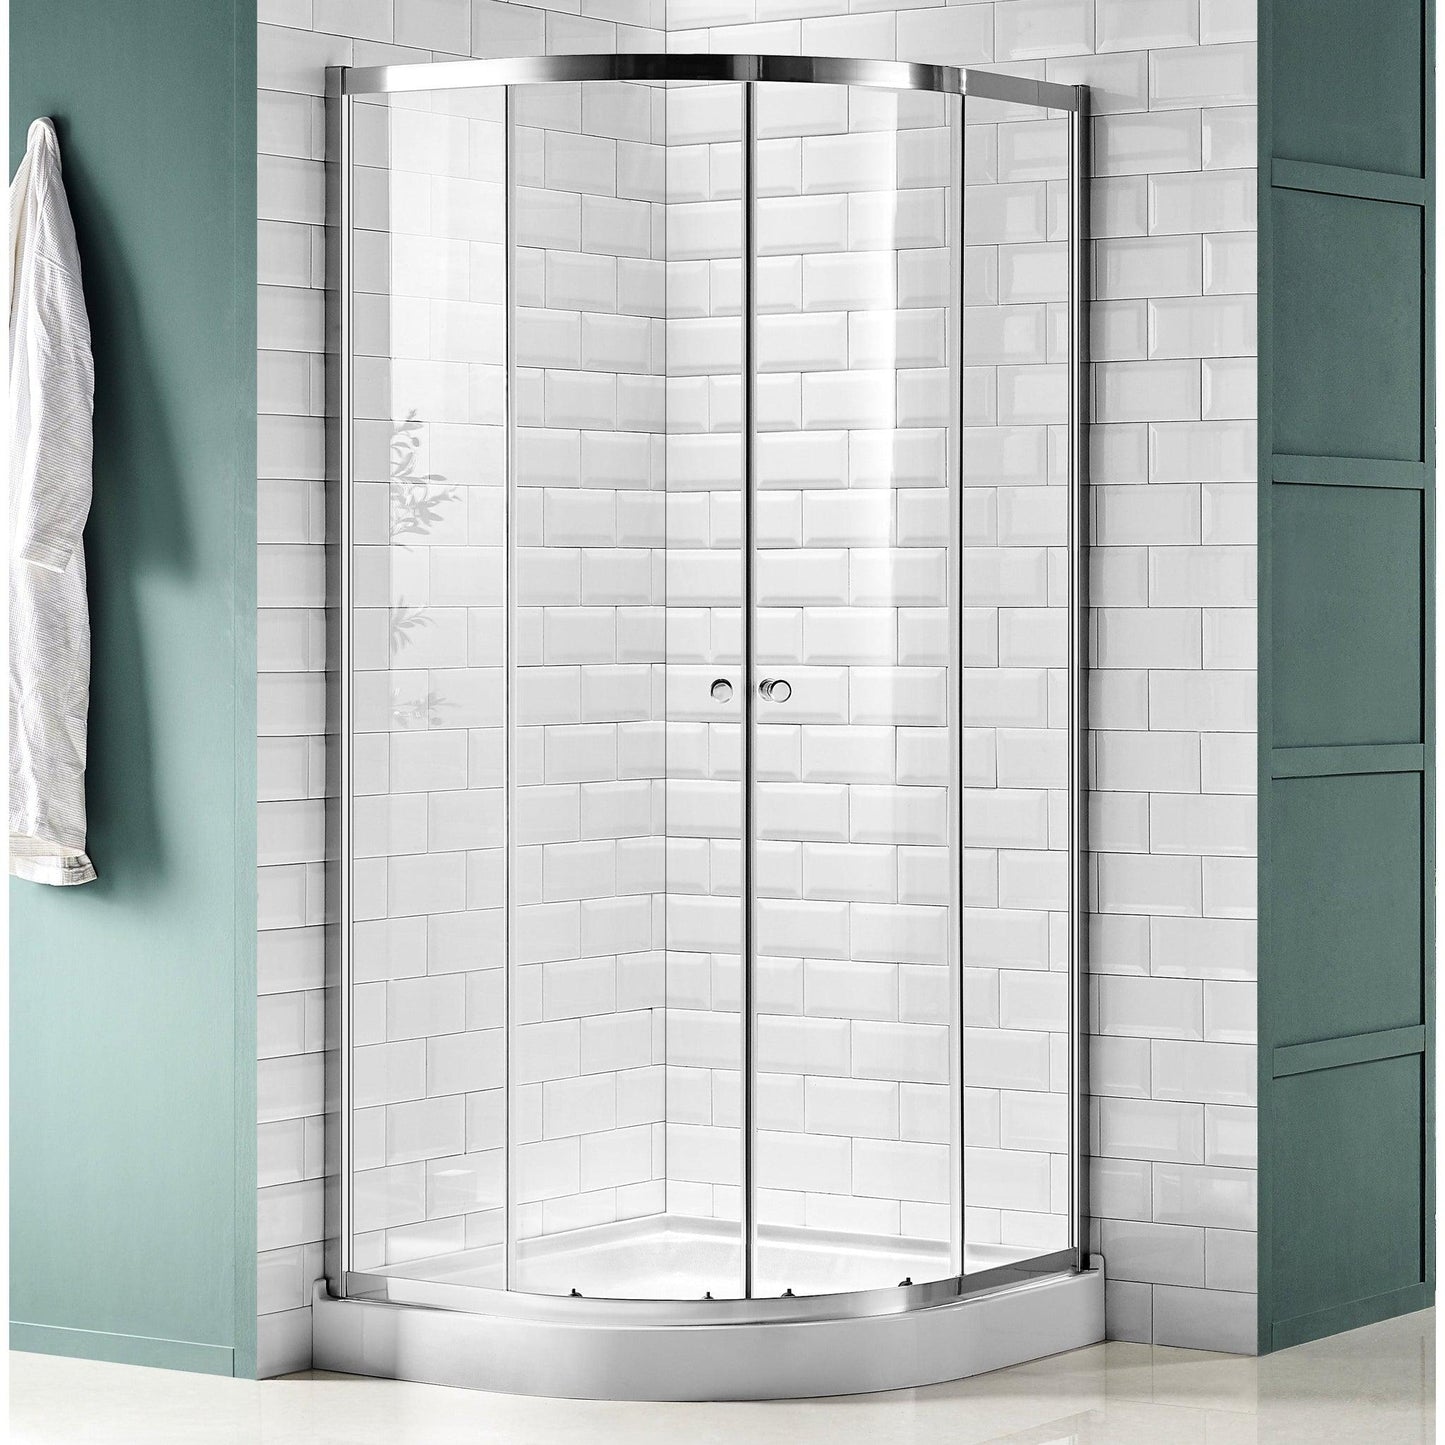 ANZZI Mare Series 35" x 76" Framed Round Polished Chrome Sliding Shower Door Enclosure With Handle and Tsunami Guard